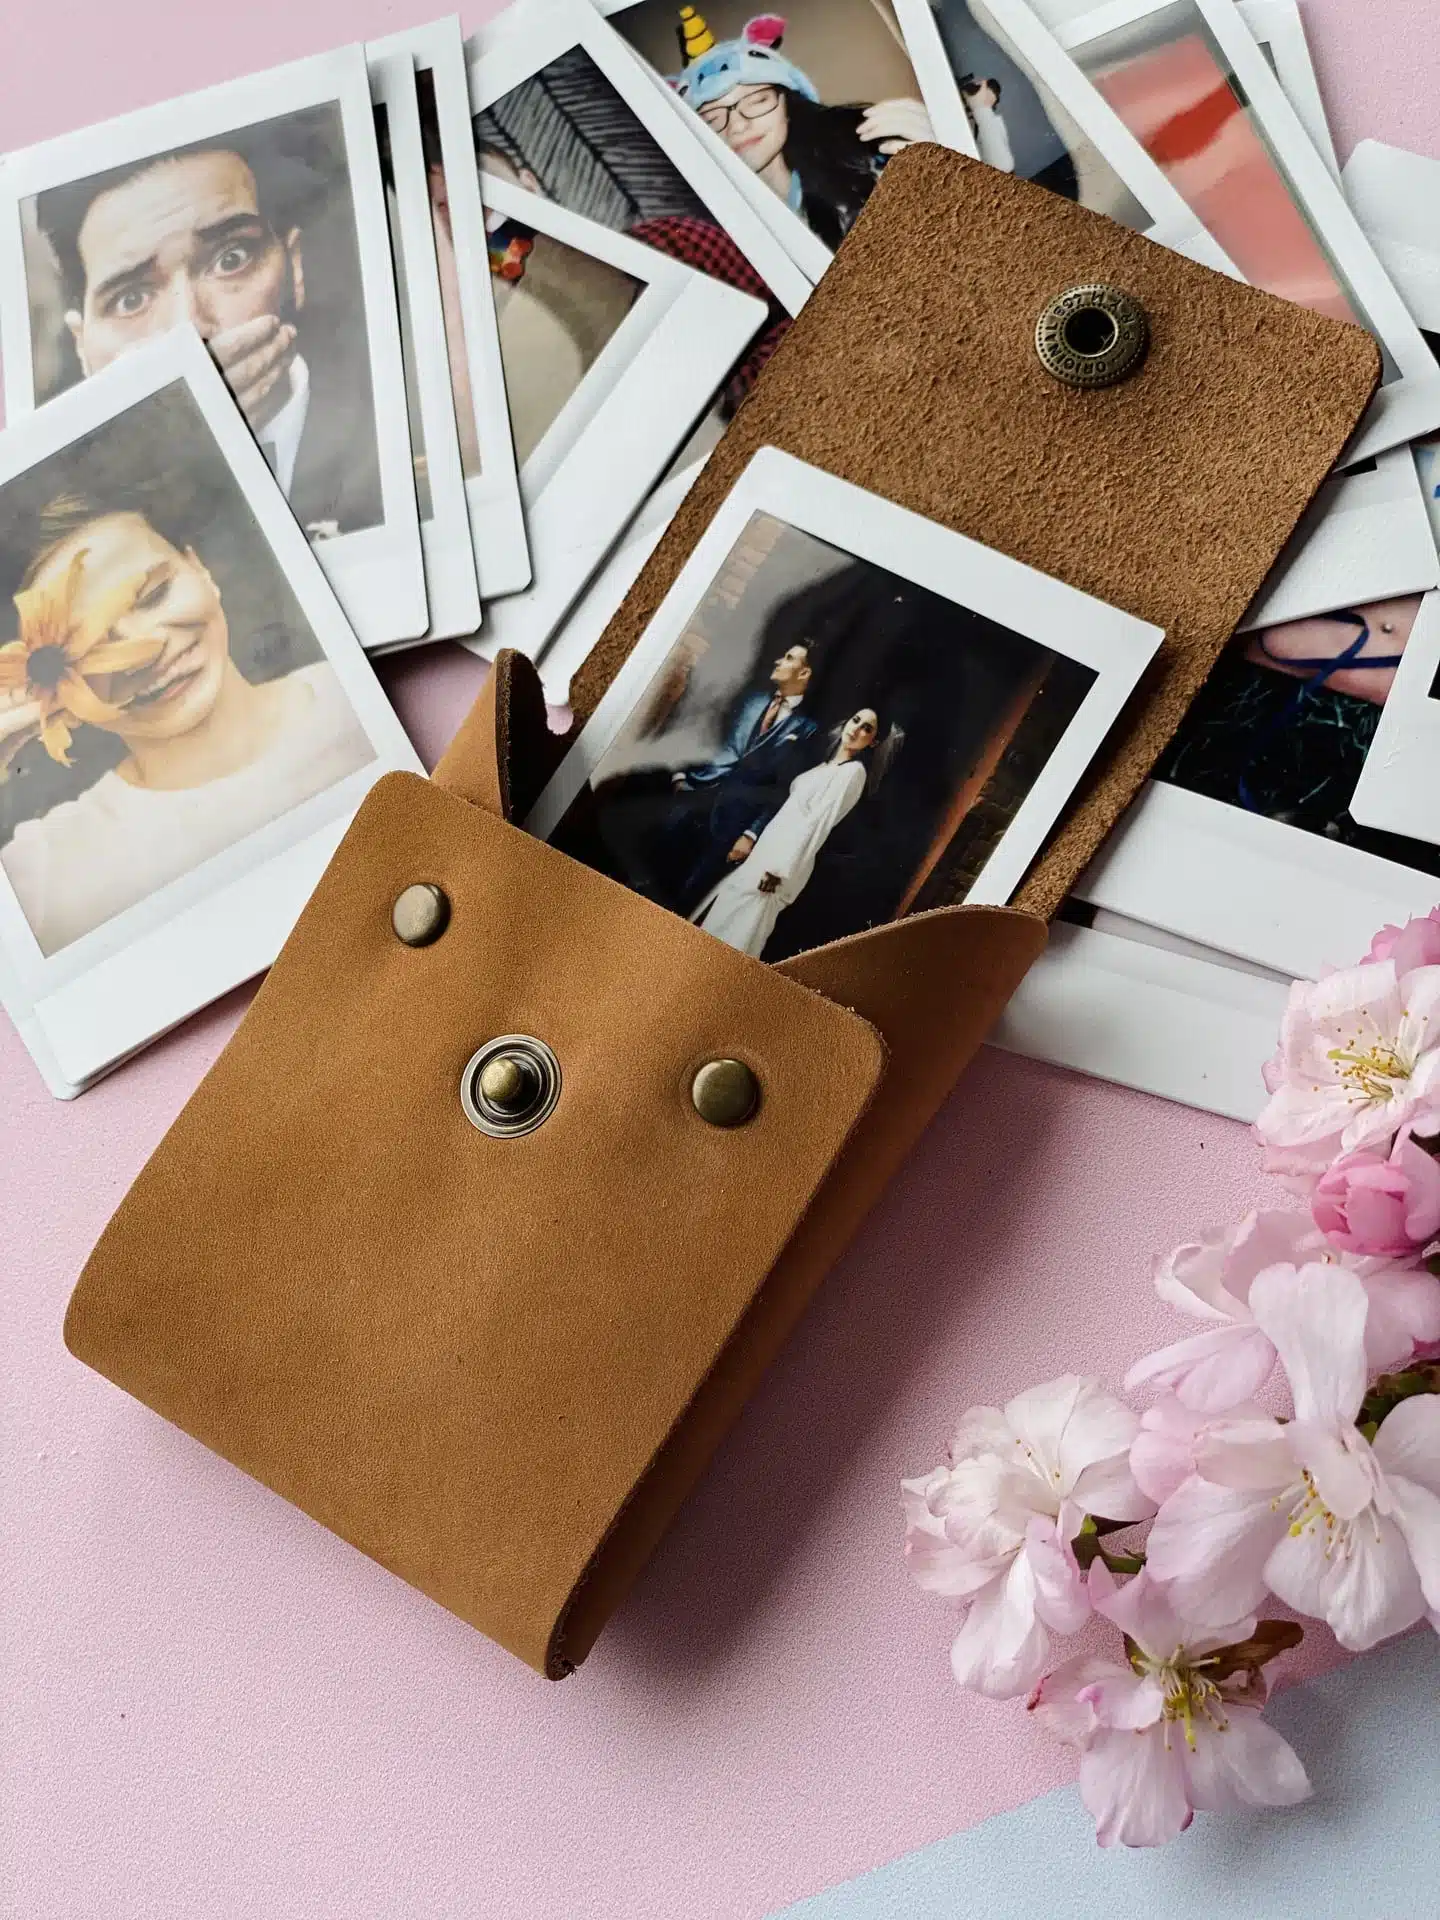 Instax Leather | button closing | size Instax Mini | 8.6×5.4cm | 3.4×2.1″ | real leather envelope for instax prints | handmade polaroid pouch